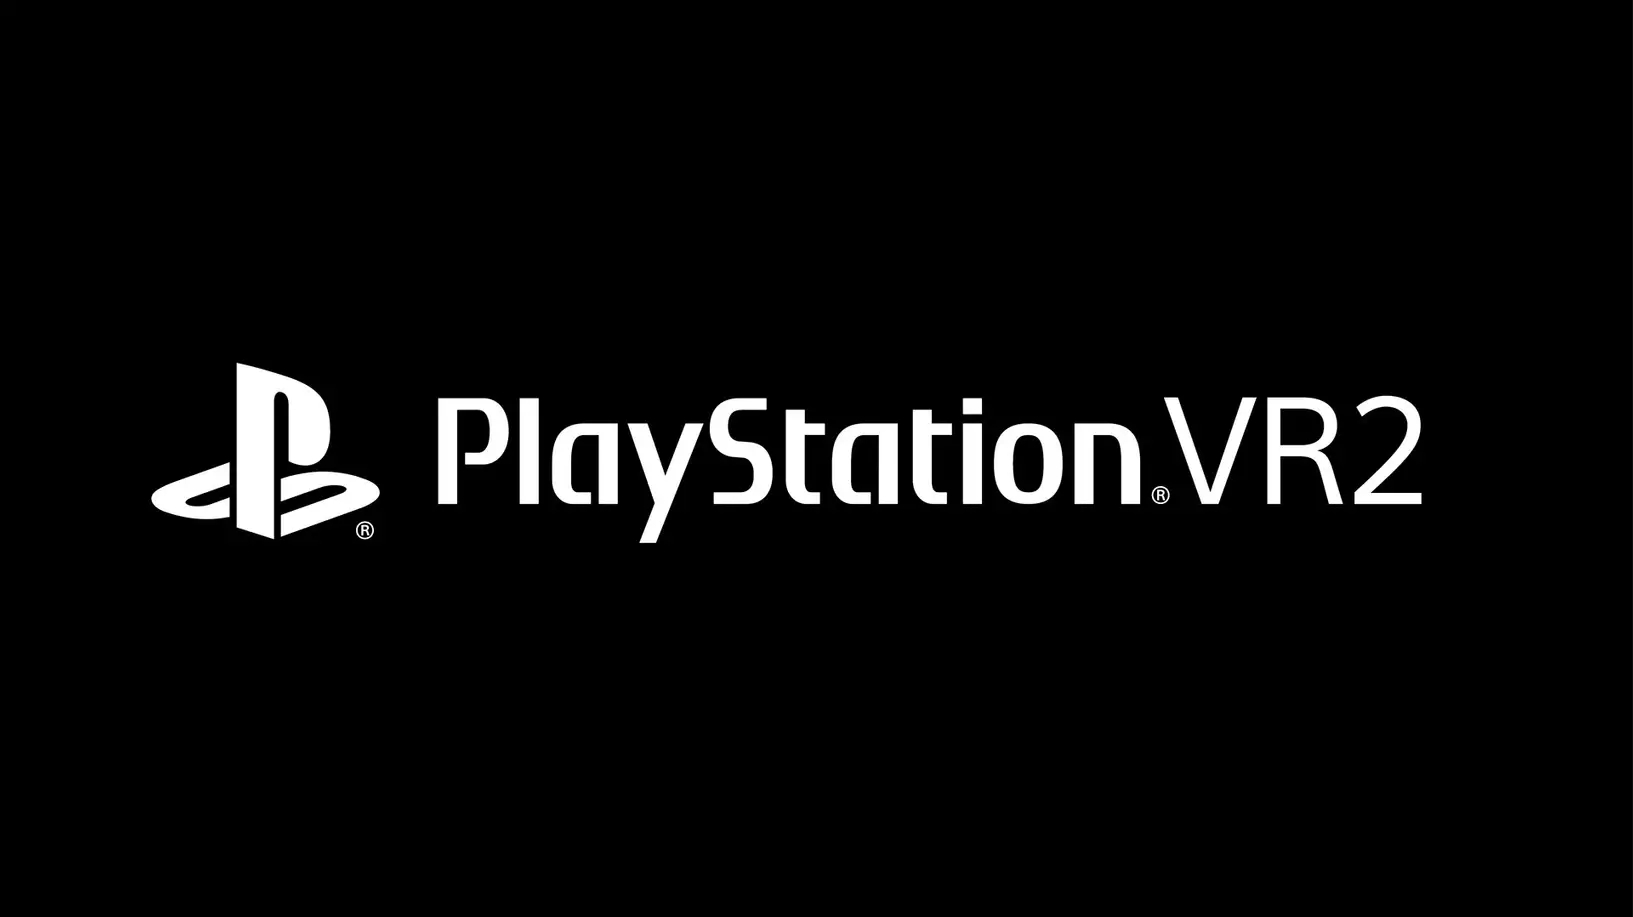 Sony Announces PlayStation VR 2 Specs, but no Release Date or Price